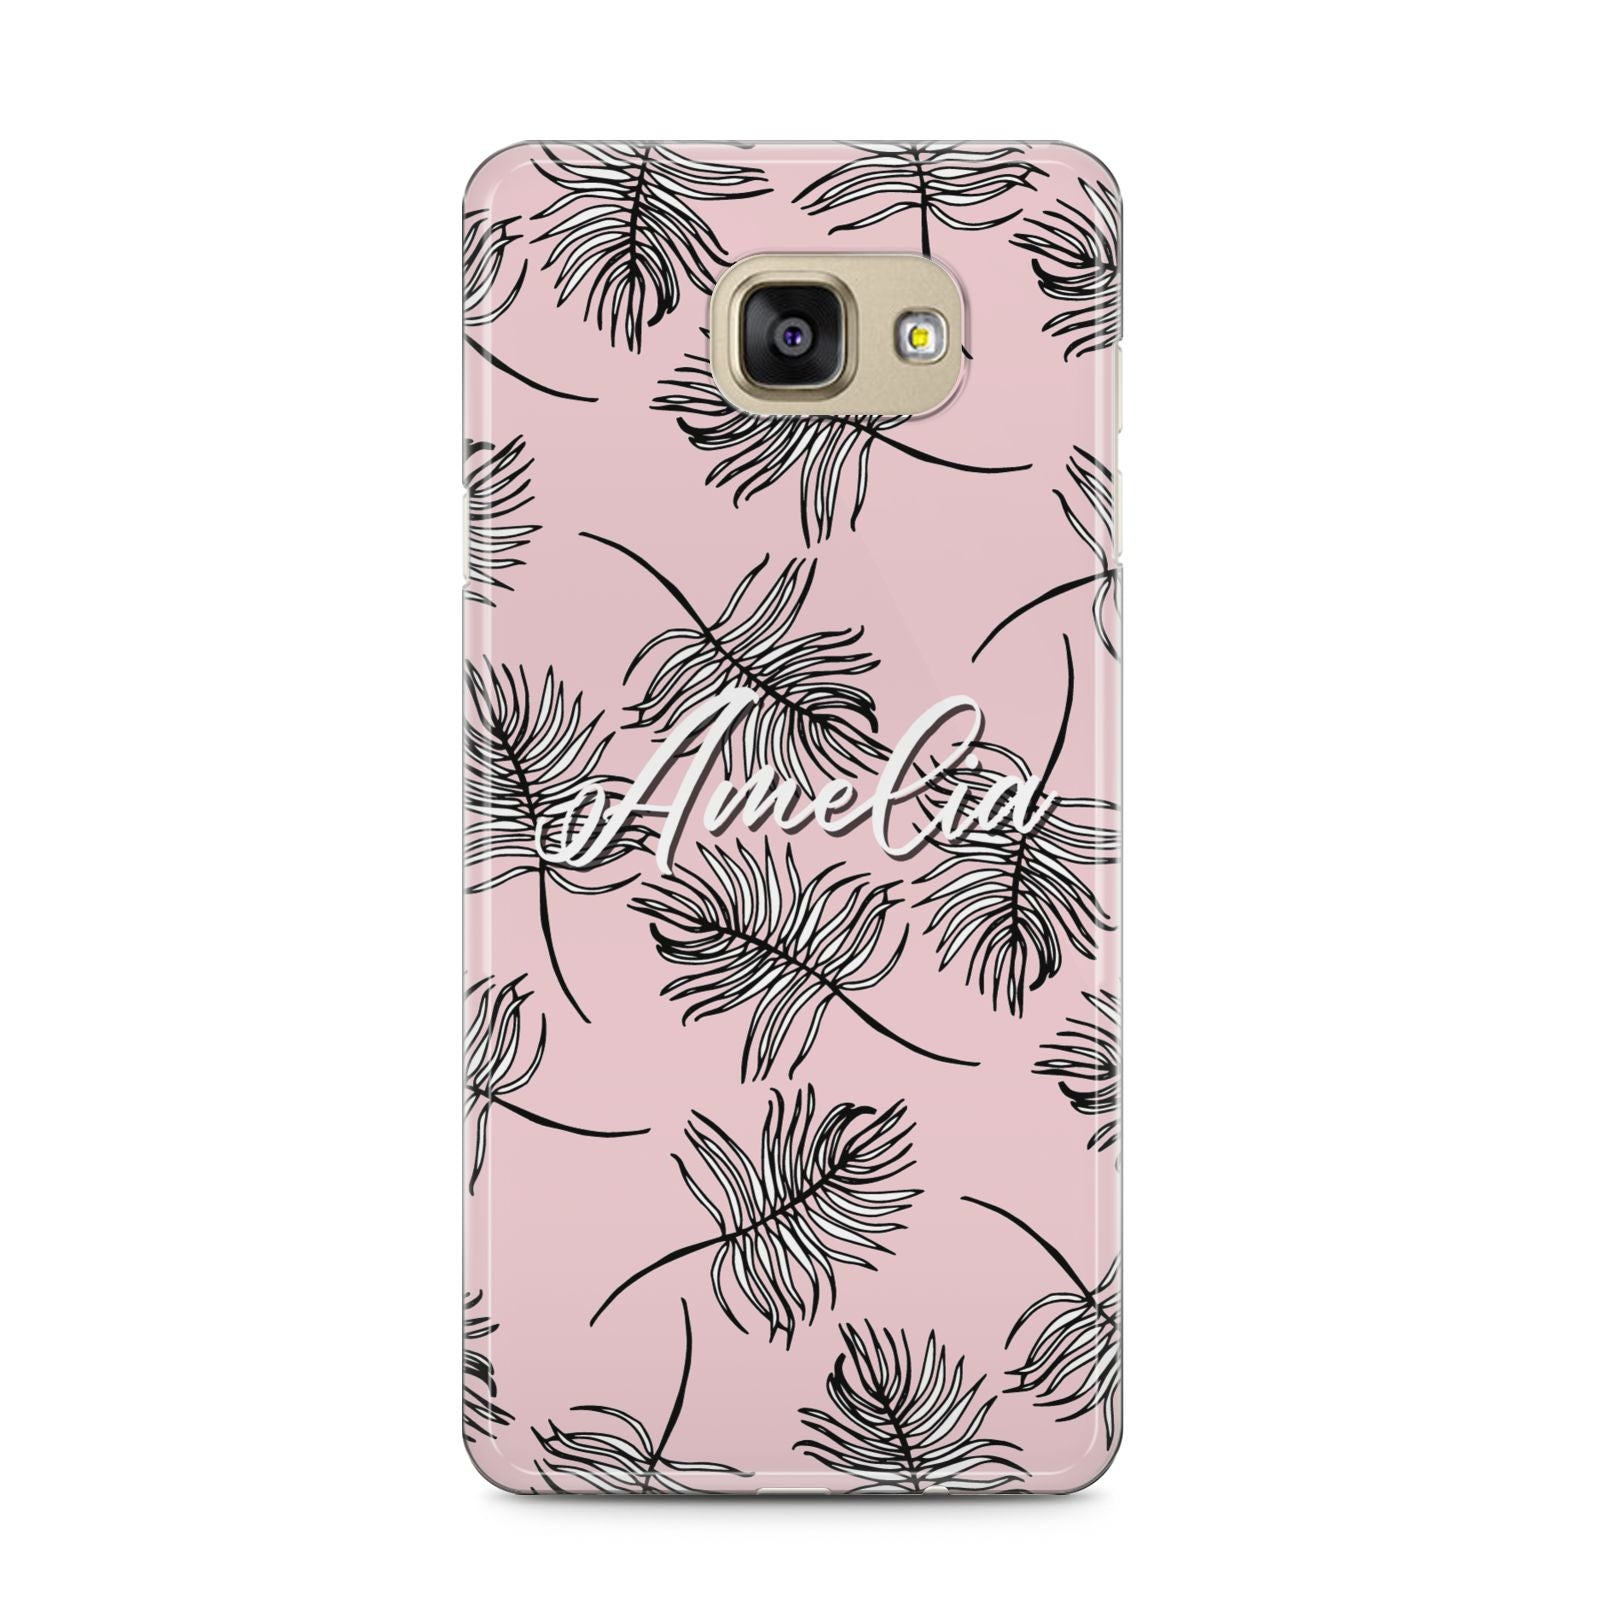 Personalised Pink Monochrome Tropical Leaf Samsung Galaxy A5 2016 Case on gold phone